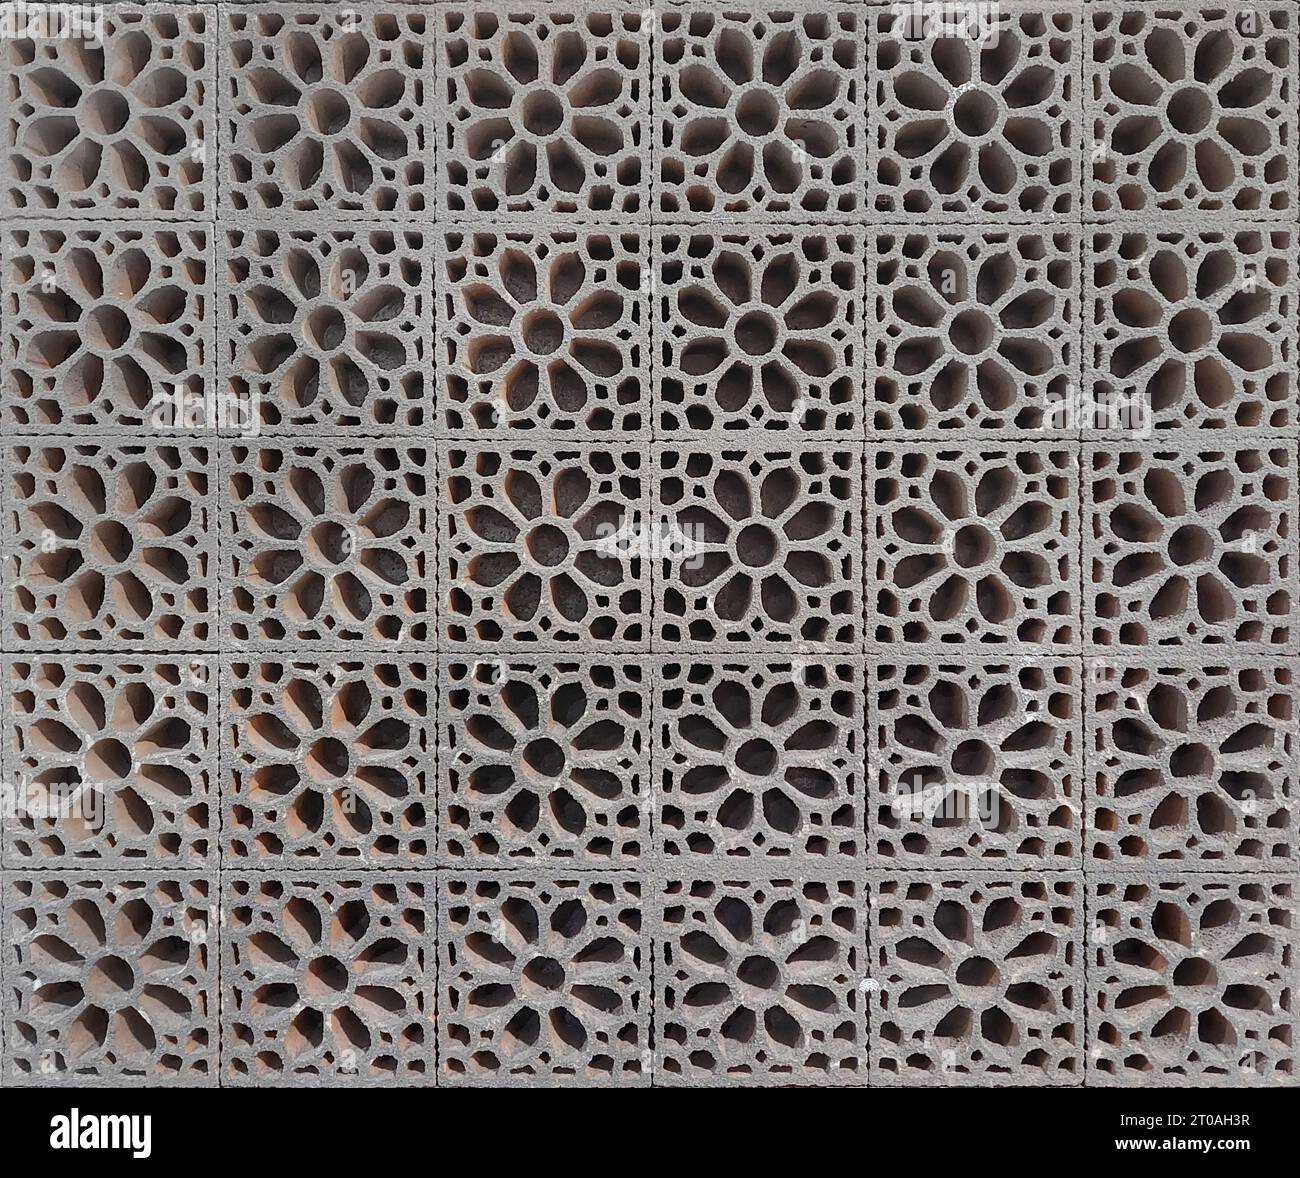 Close up pattern of moulded clay or ceramic latticework, or simply called as Roster, in flower pattern. Latticework is a moulded or cutout pattern Stock Photo